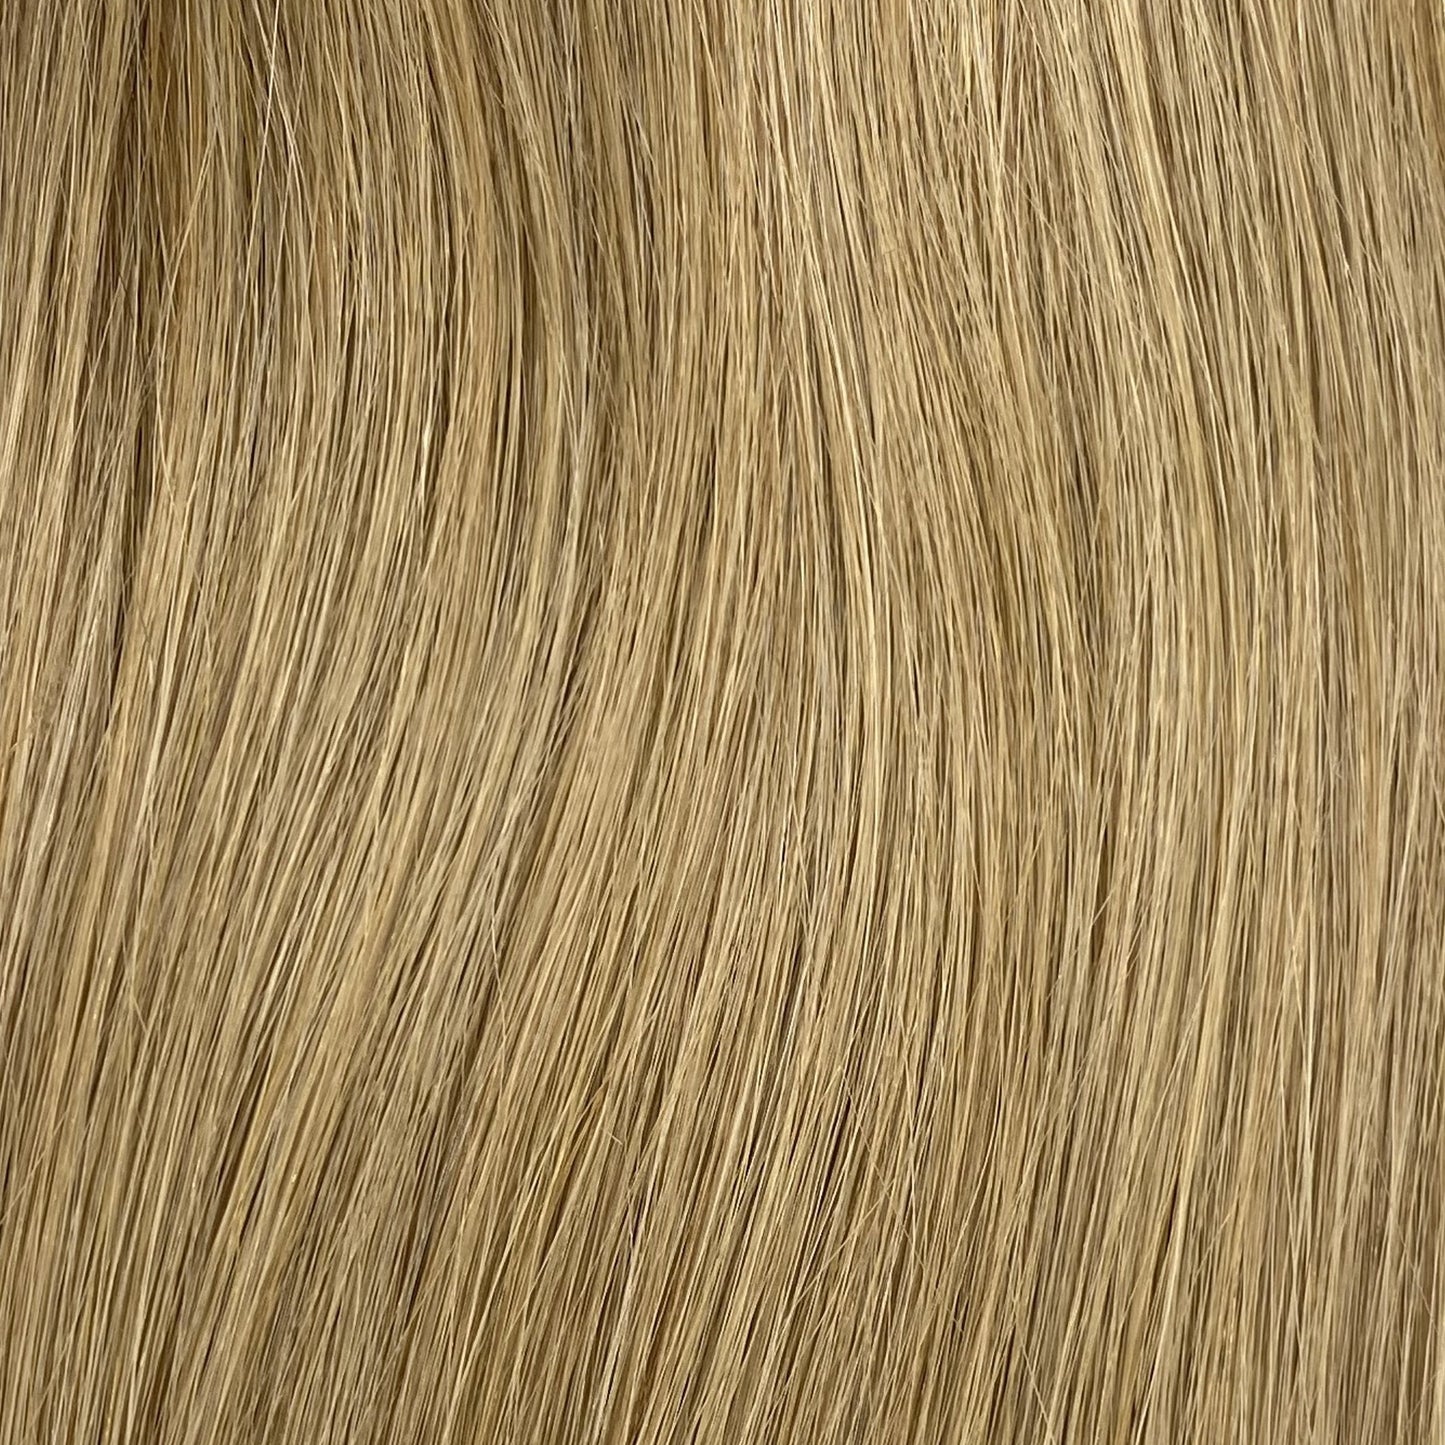 Velo #10 - 20 inches - Dark Ash Blonde Velo DR Hair Products Co 